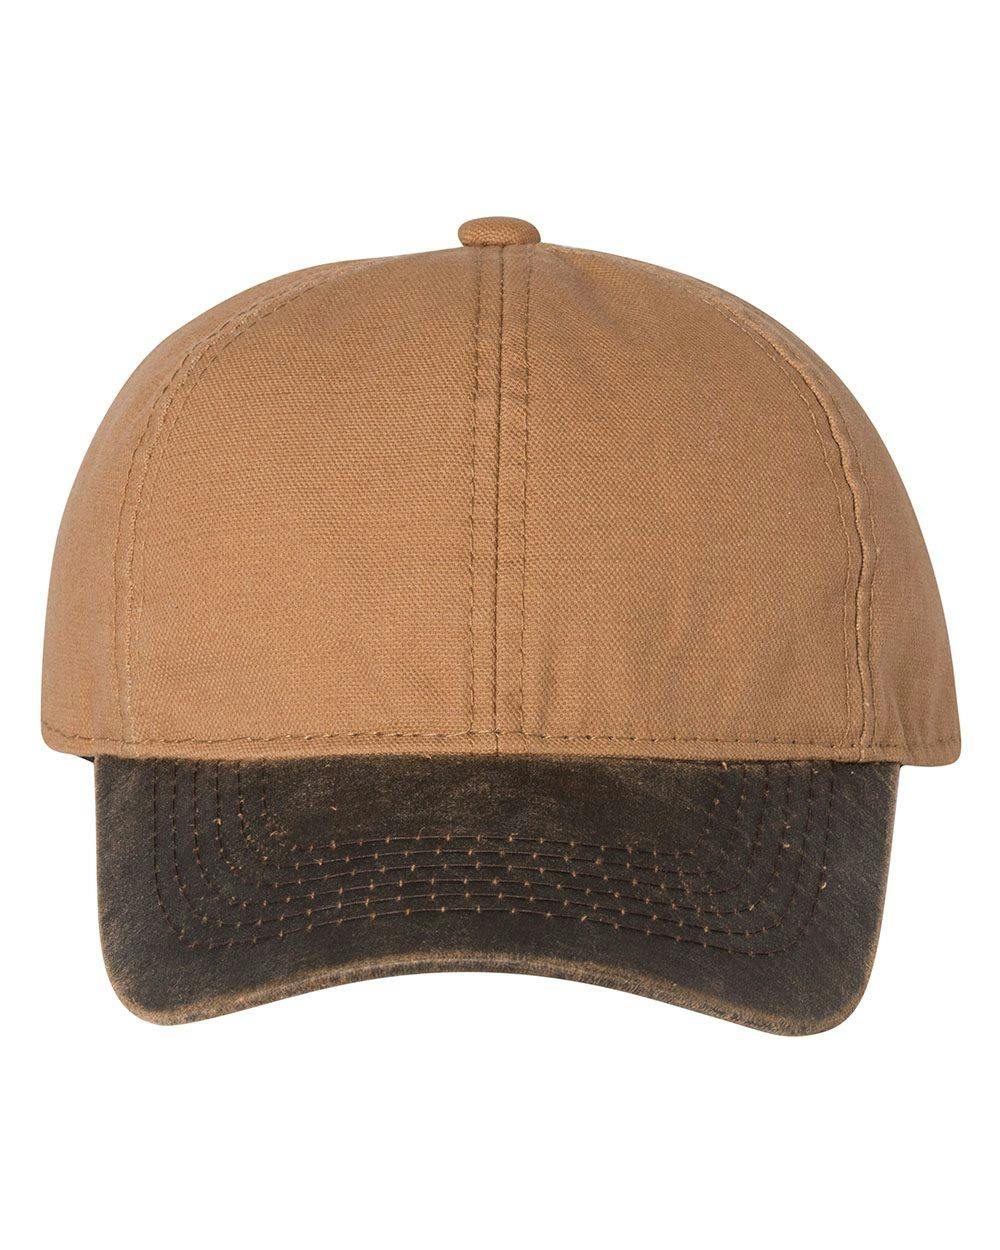 Image for Weathered Canvas Crown with Contrast-Color Visor Cap - HPK100